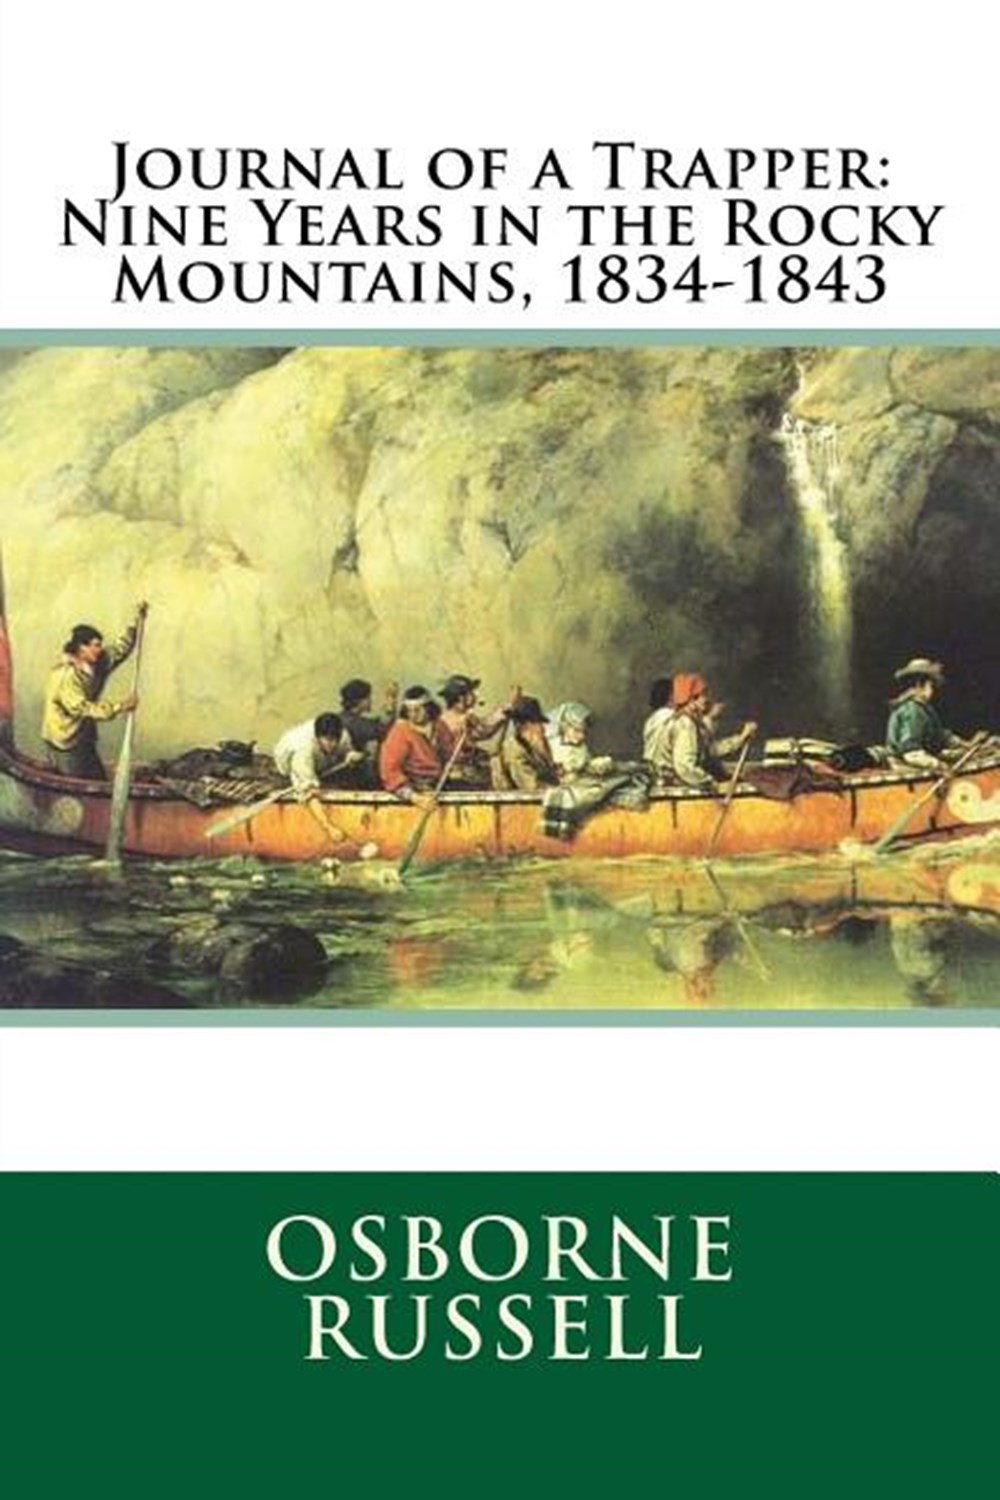 Journal of a Trapper Nine Years in the Rocky Mountains, 1834-1843